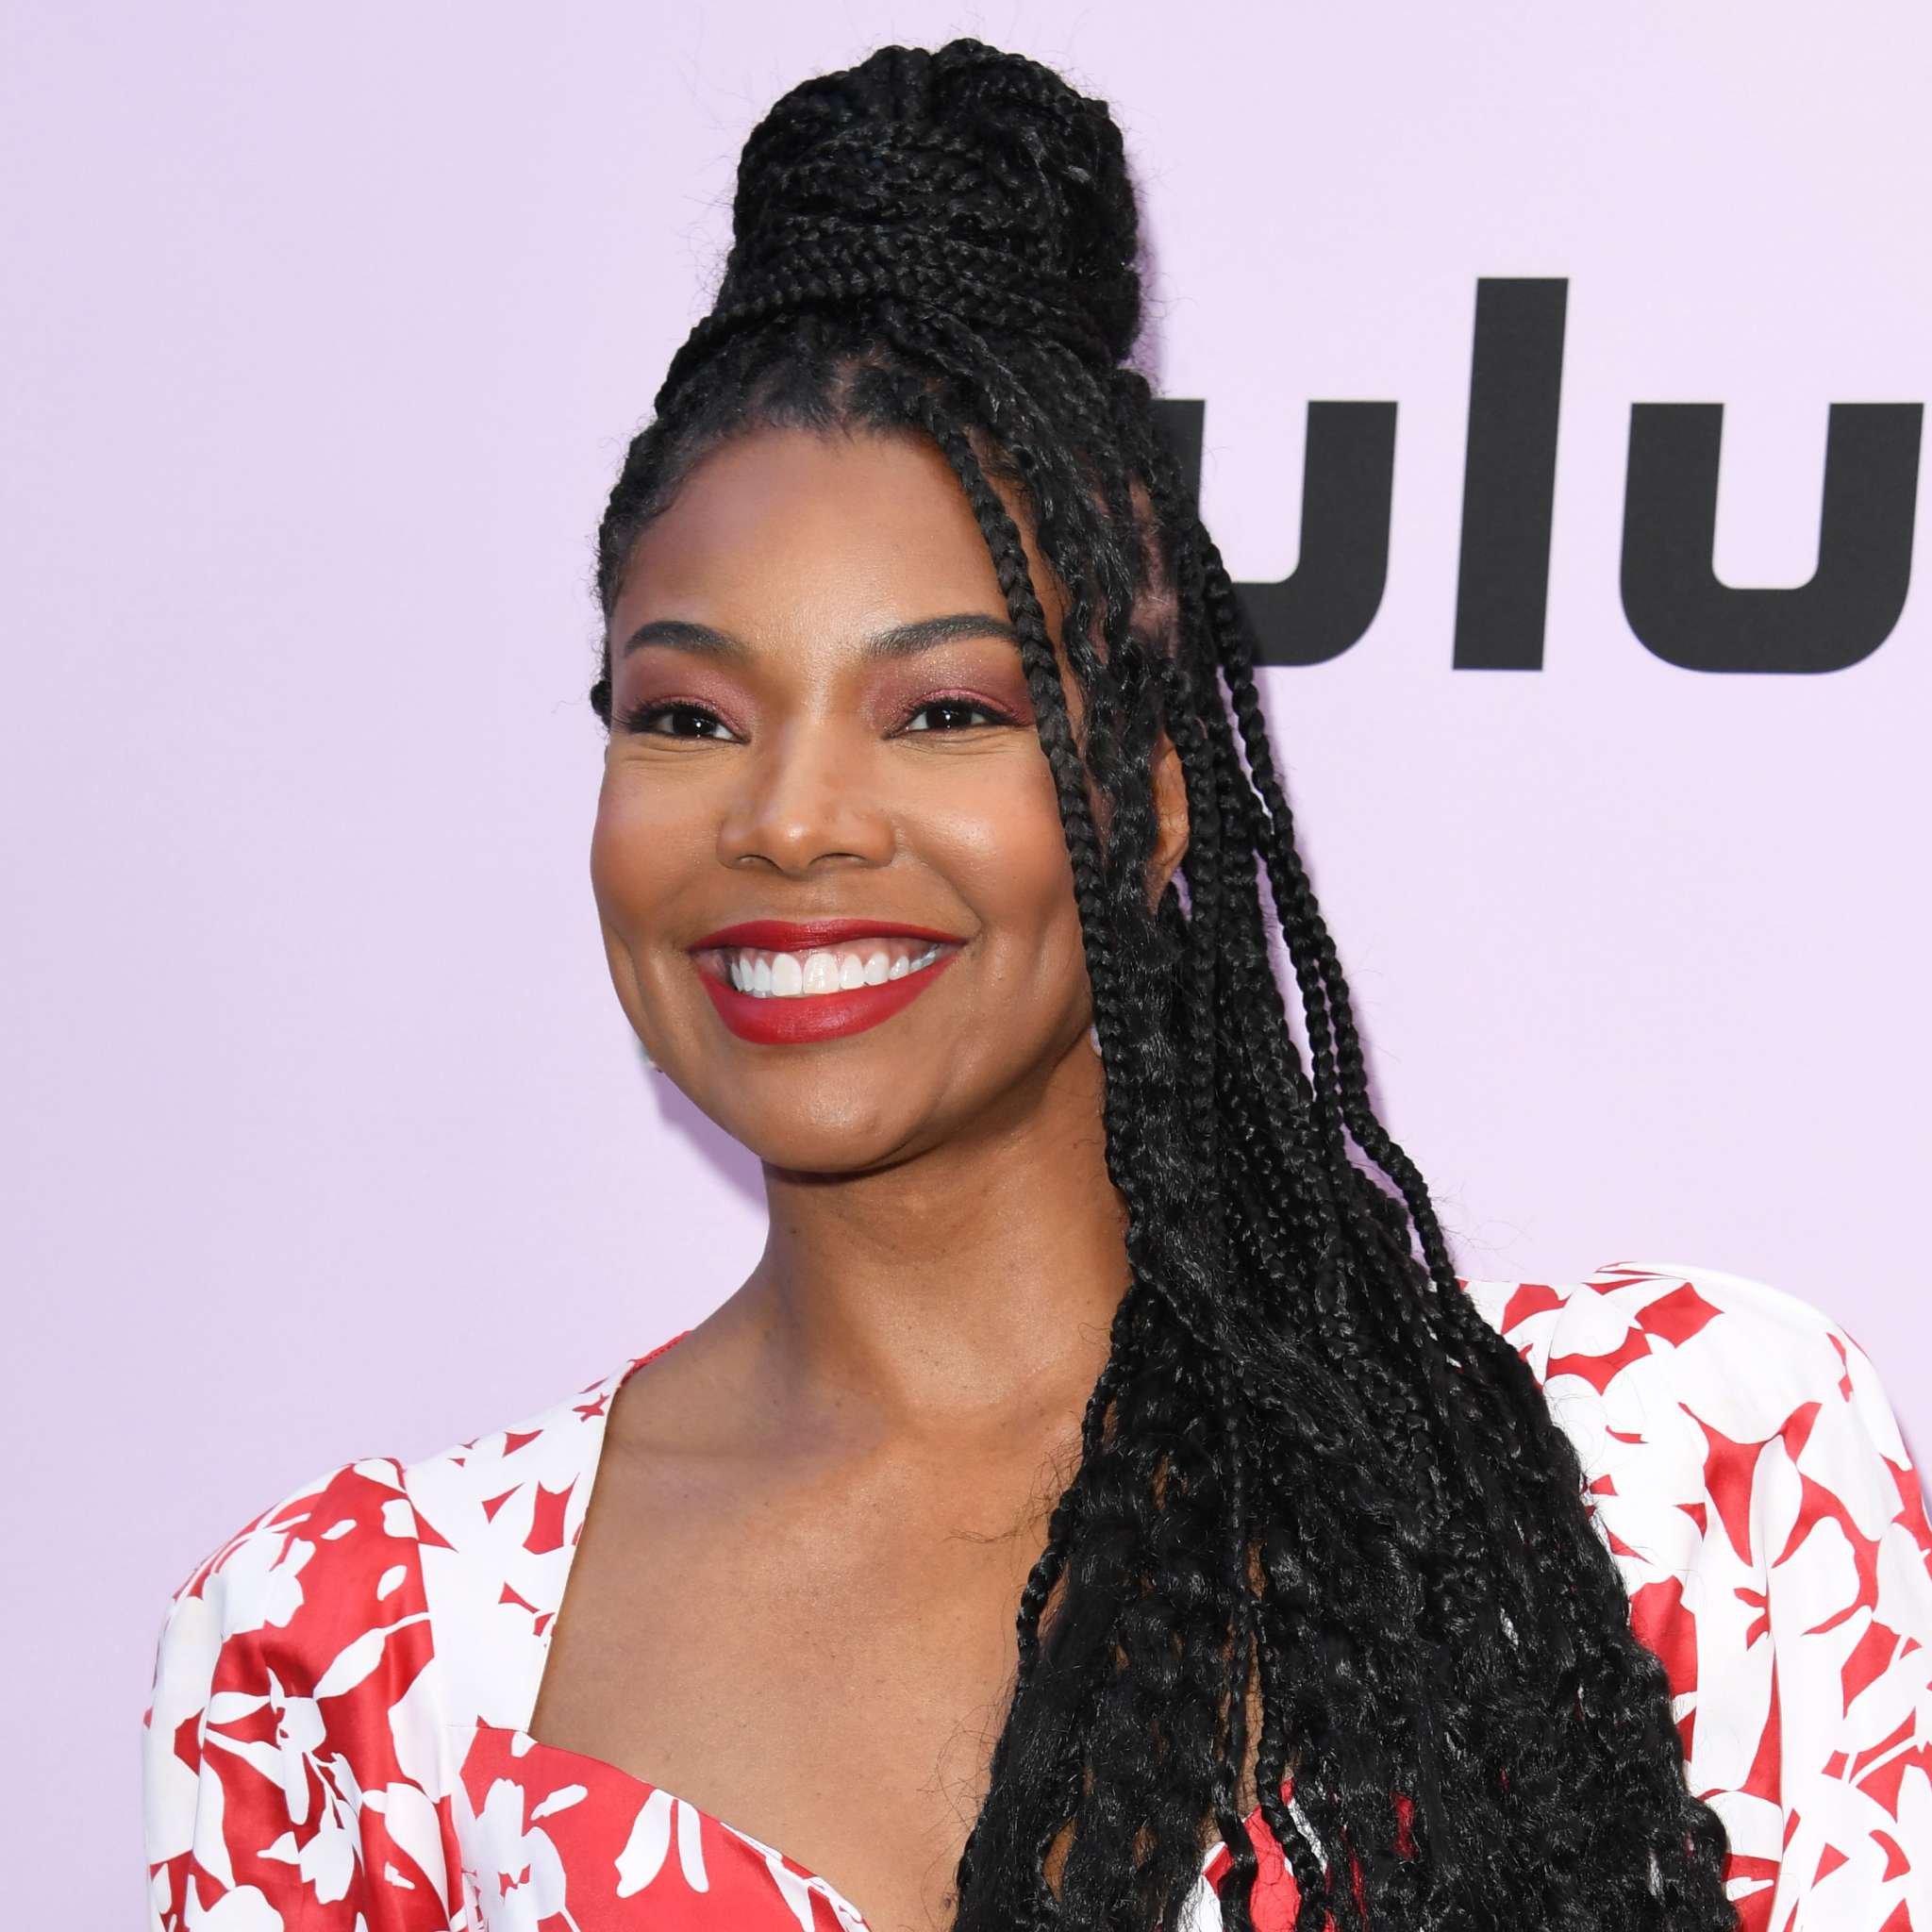 gabrielle-union-is-praising-another-special-woman-ariana-debose